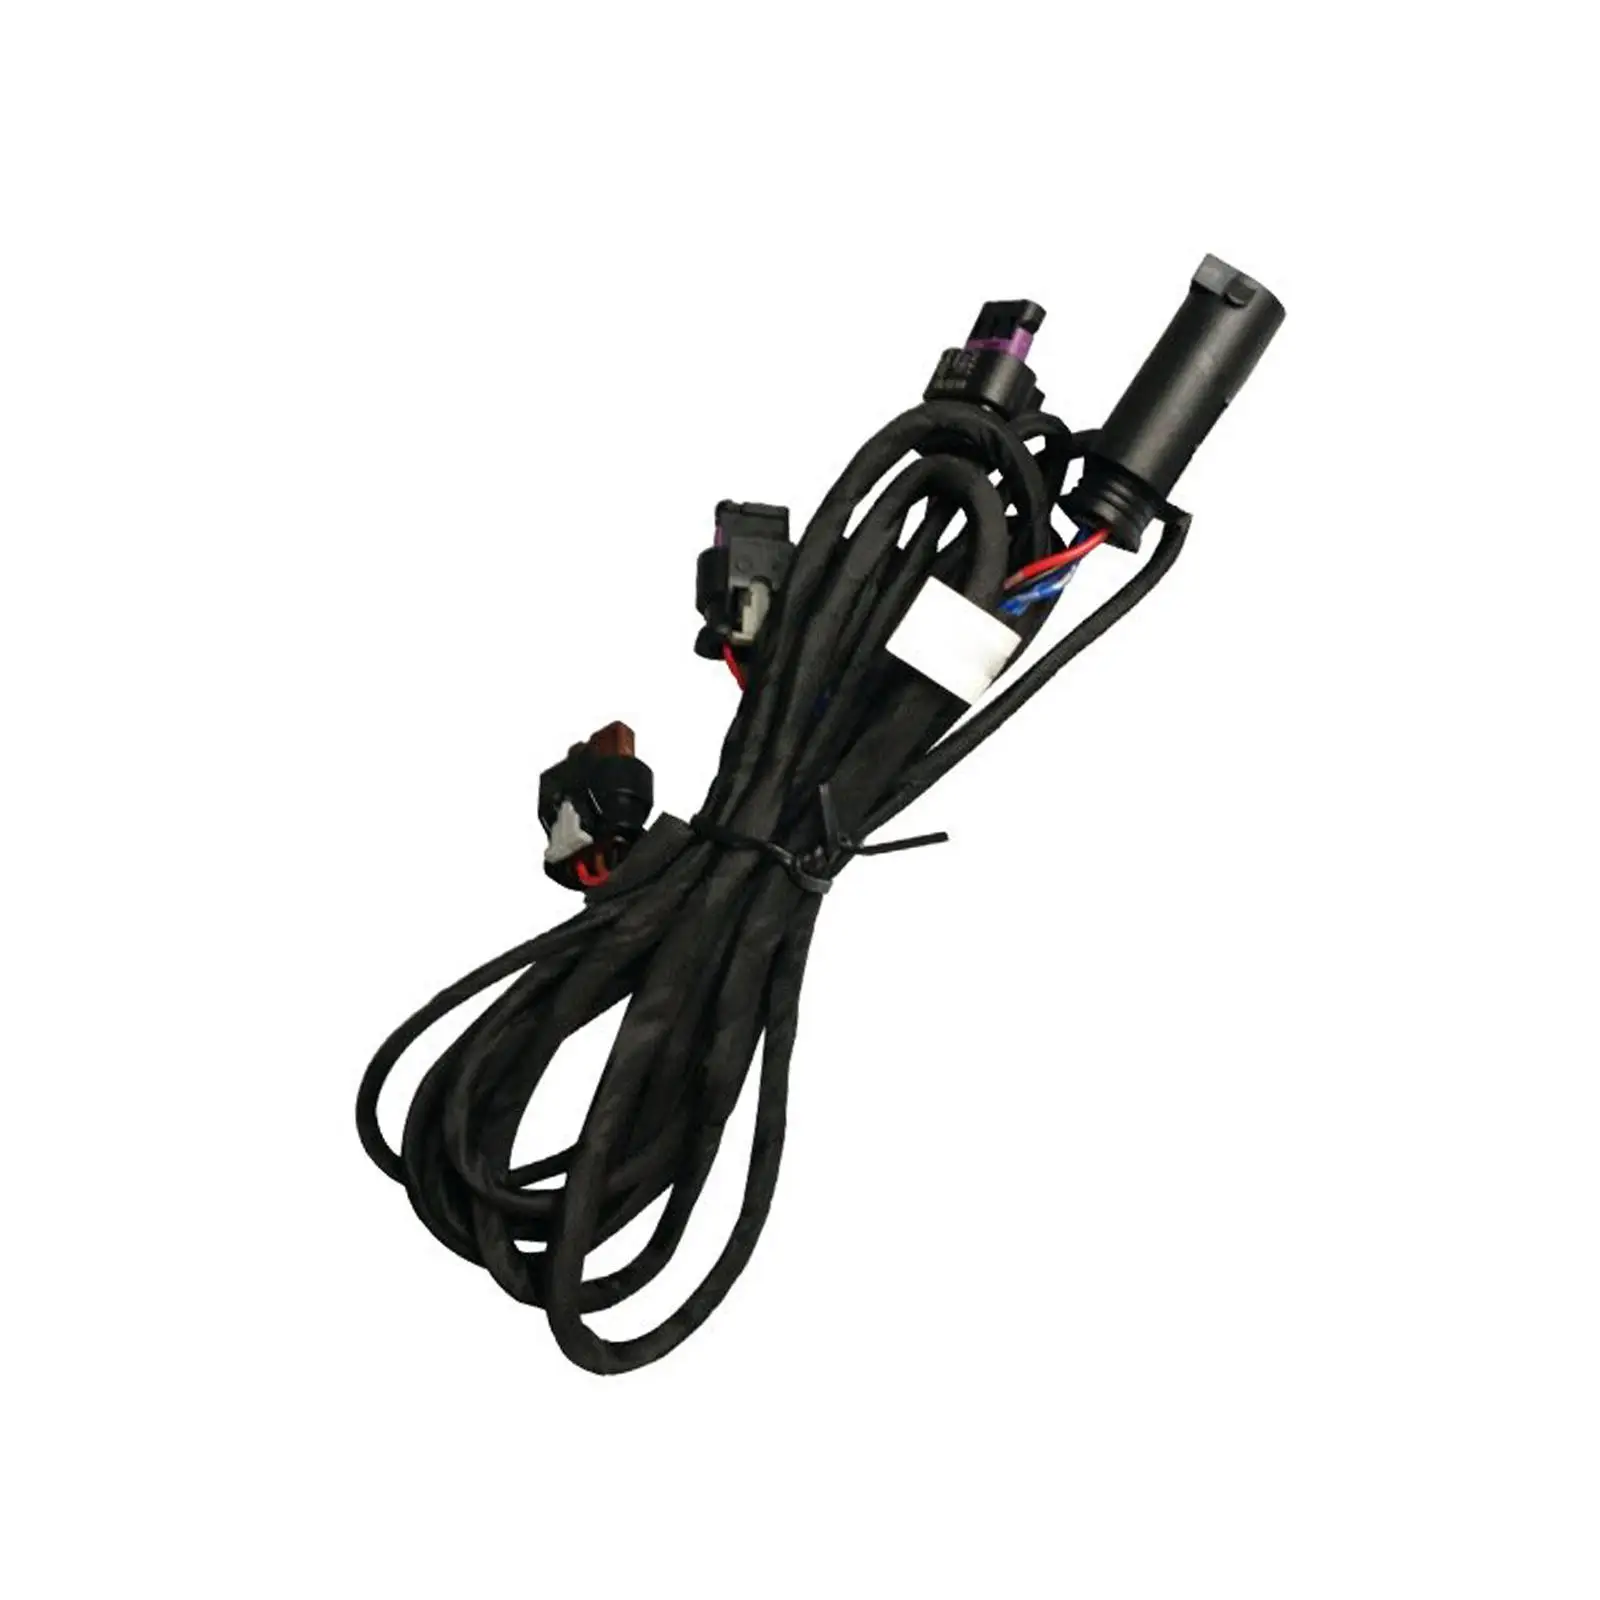 Parking Cables, Auto Accessory Replaces Front Rear Wiring Harness for 3 Series 4 Series F33 F30, Sturdy, Repair Part